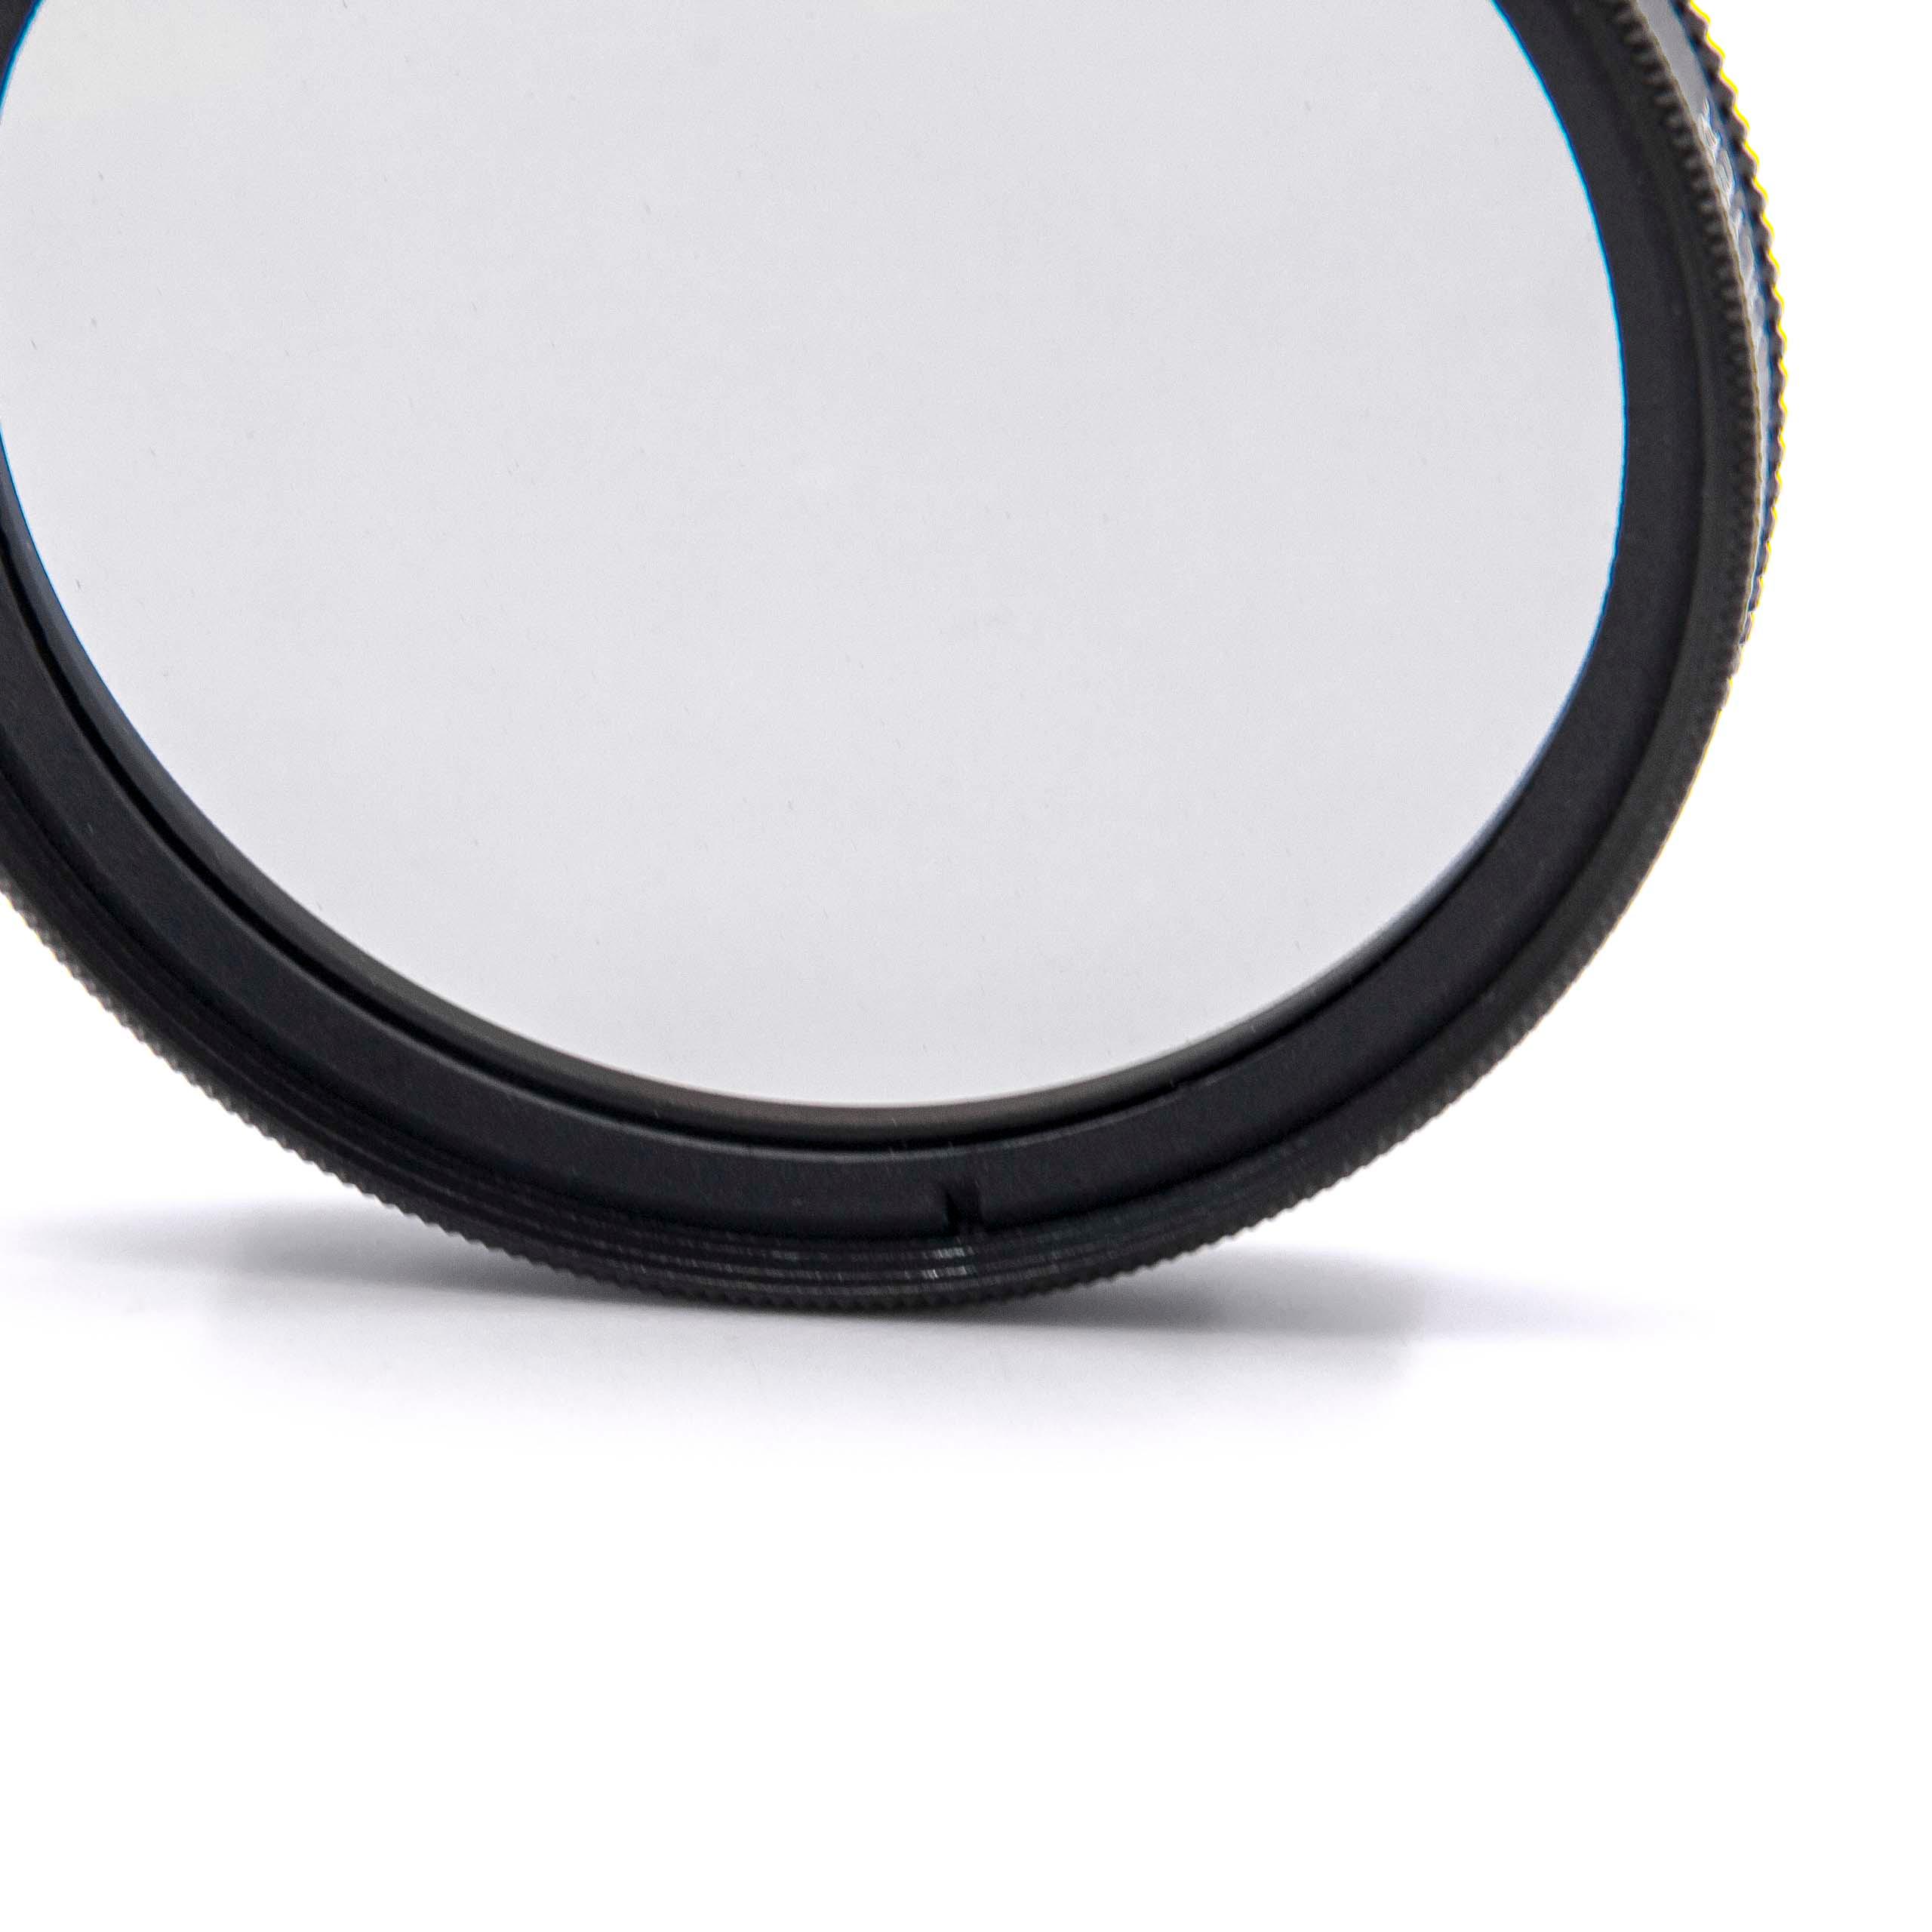 Polarising Filter suitable for Cameras & Lenses with 49 mm Filter Thread - CPL Filter